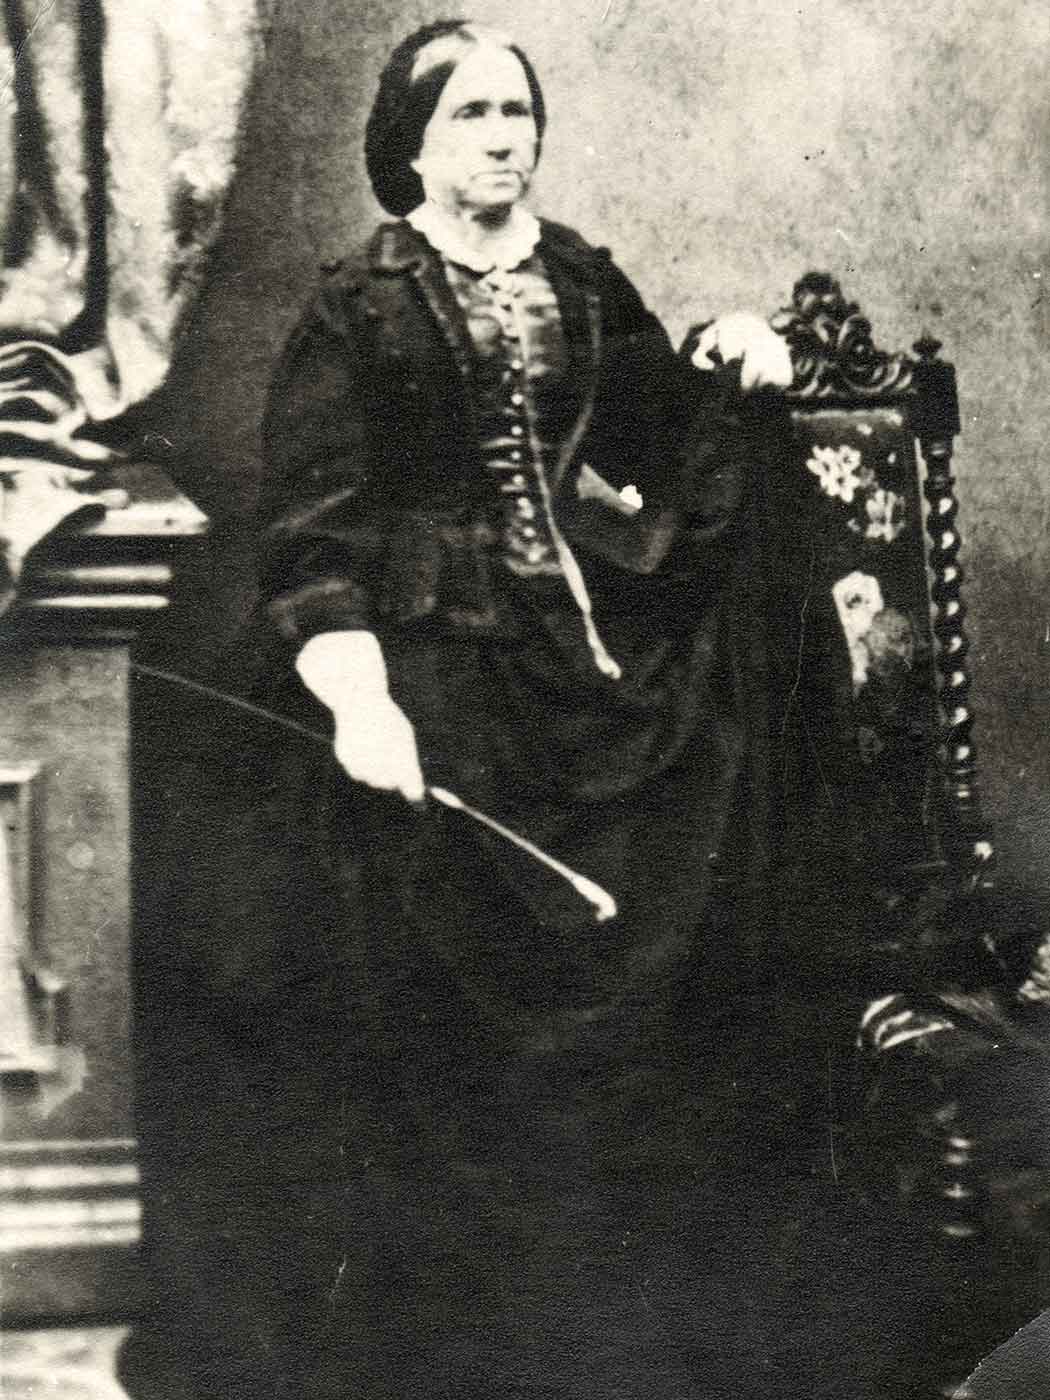 Black and white photo of a woman in black dress from the 19th Century and holding what appears to be a crop. - click to view larger image